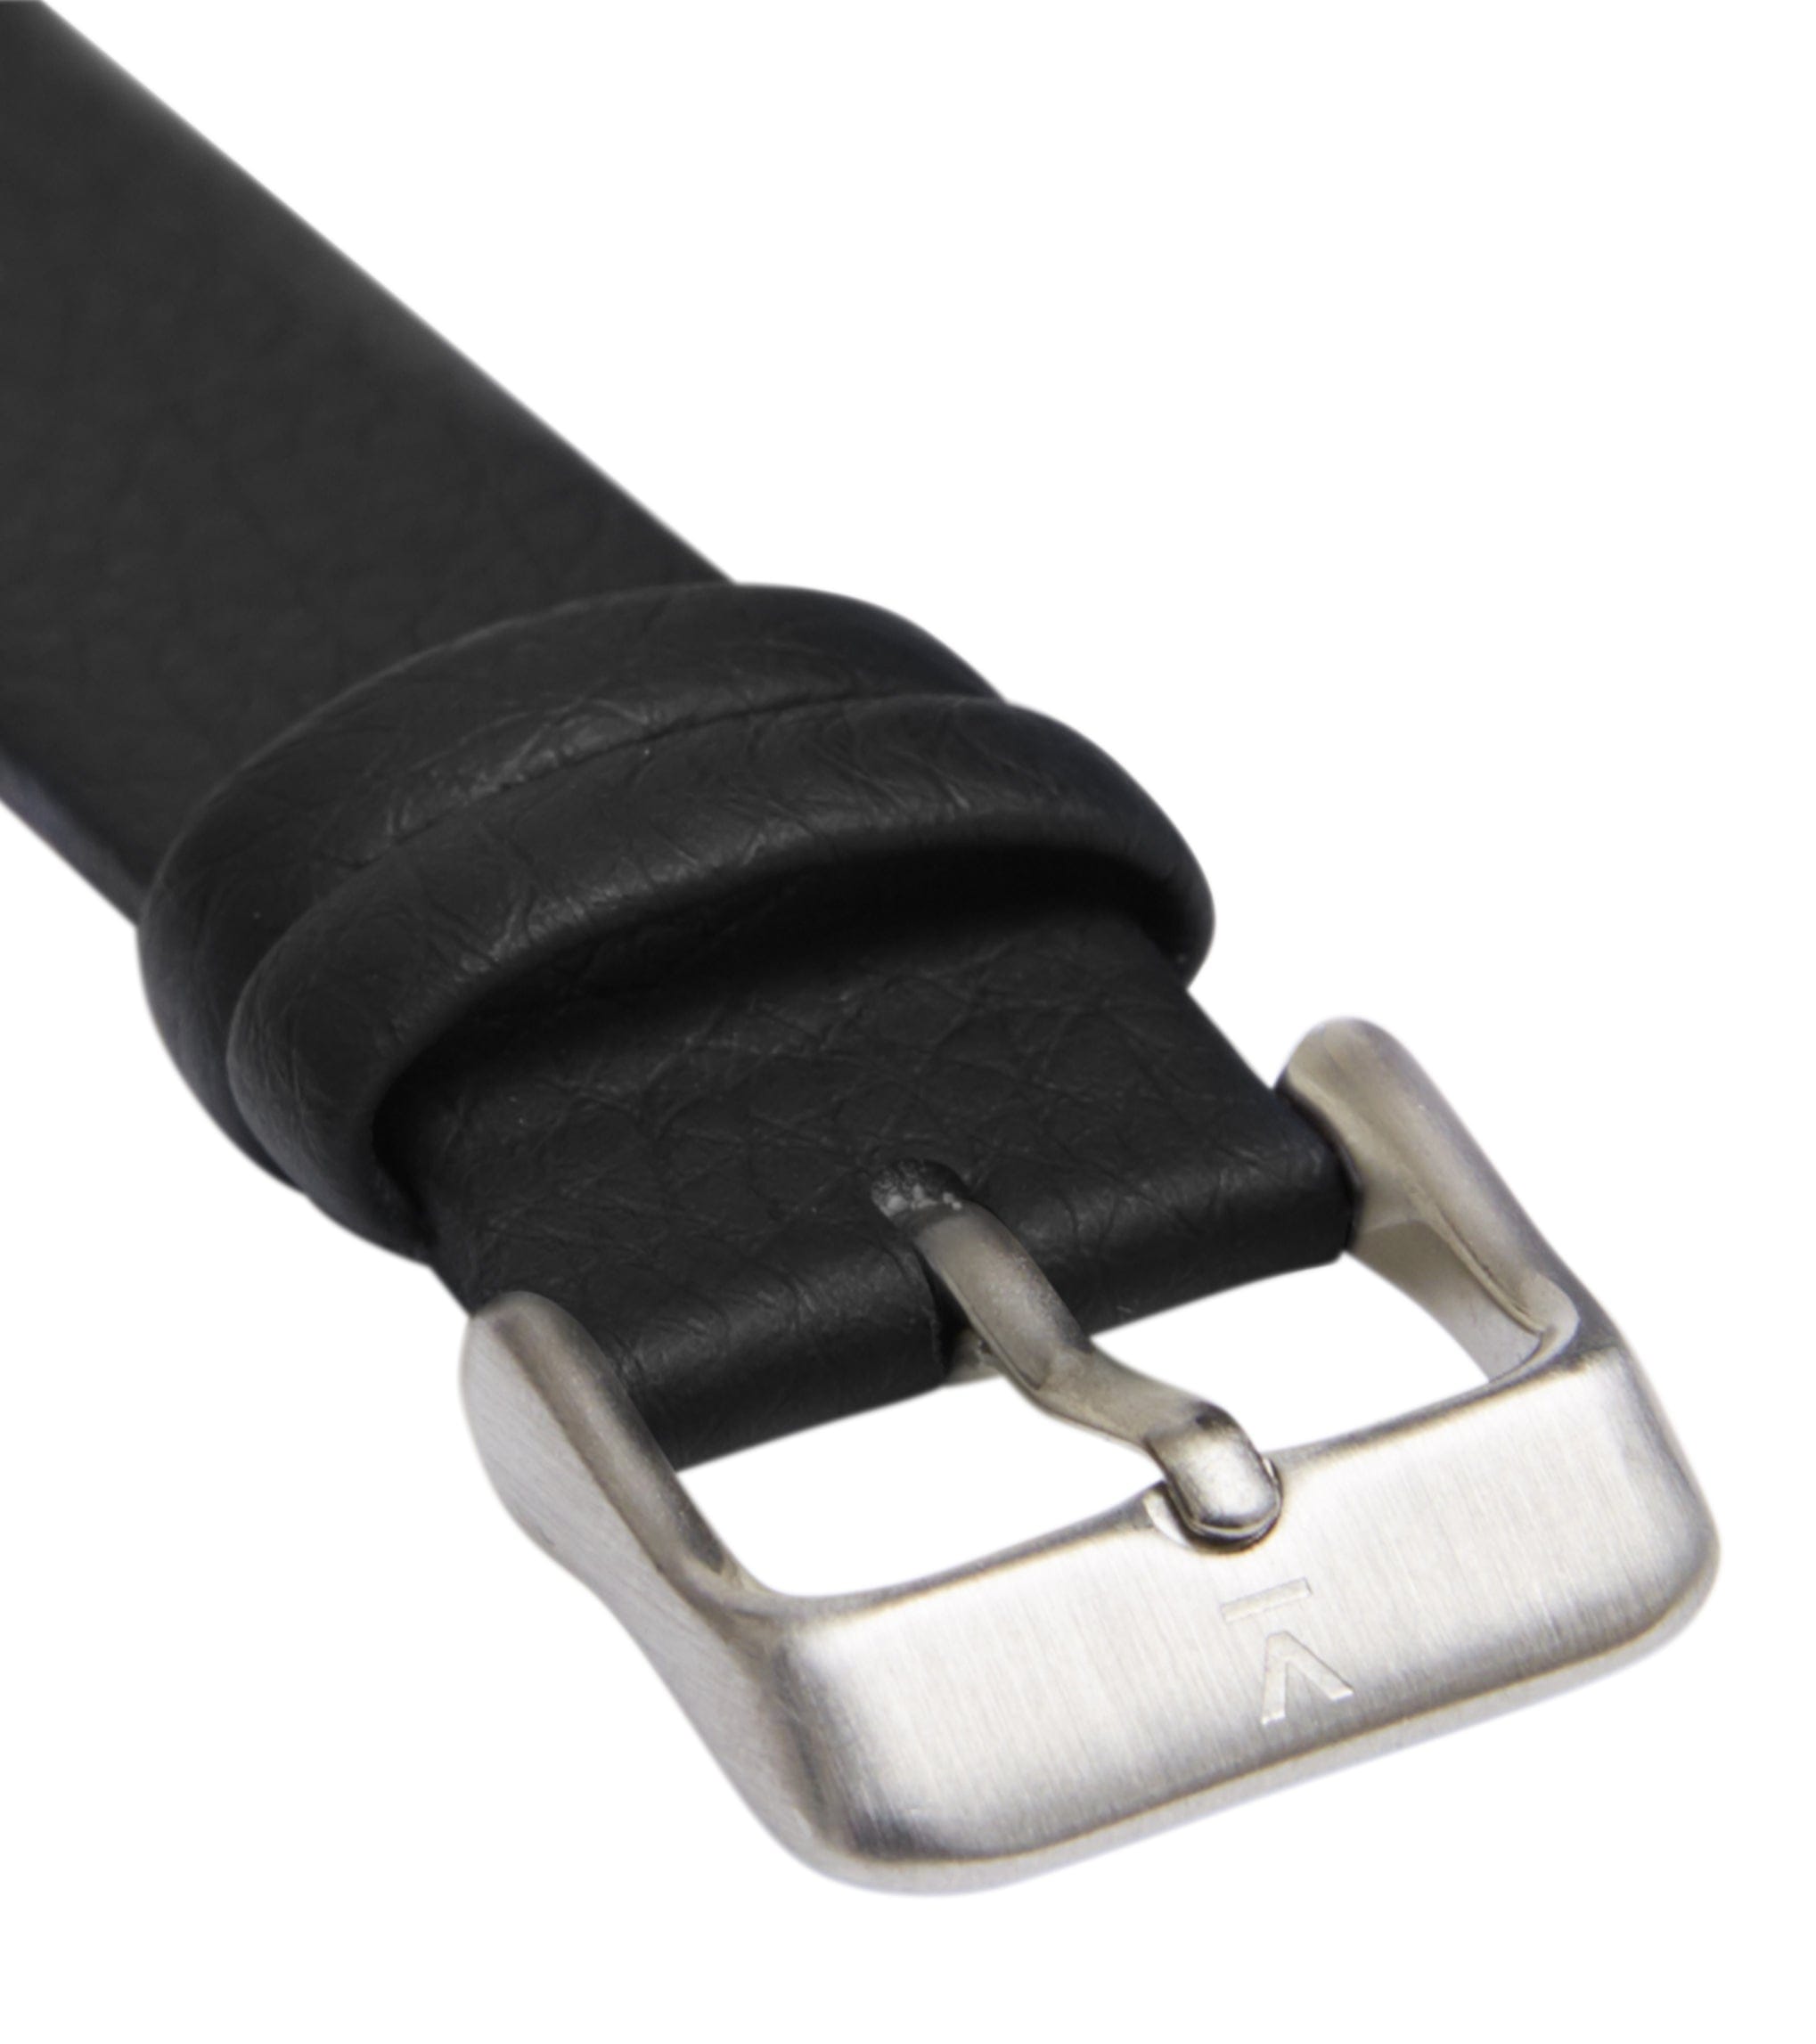 NewCollection_Buckle_SilverBlack.jpg